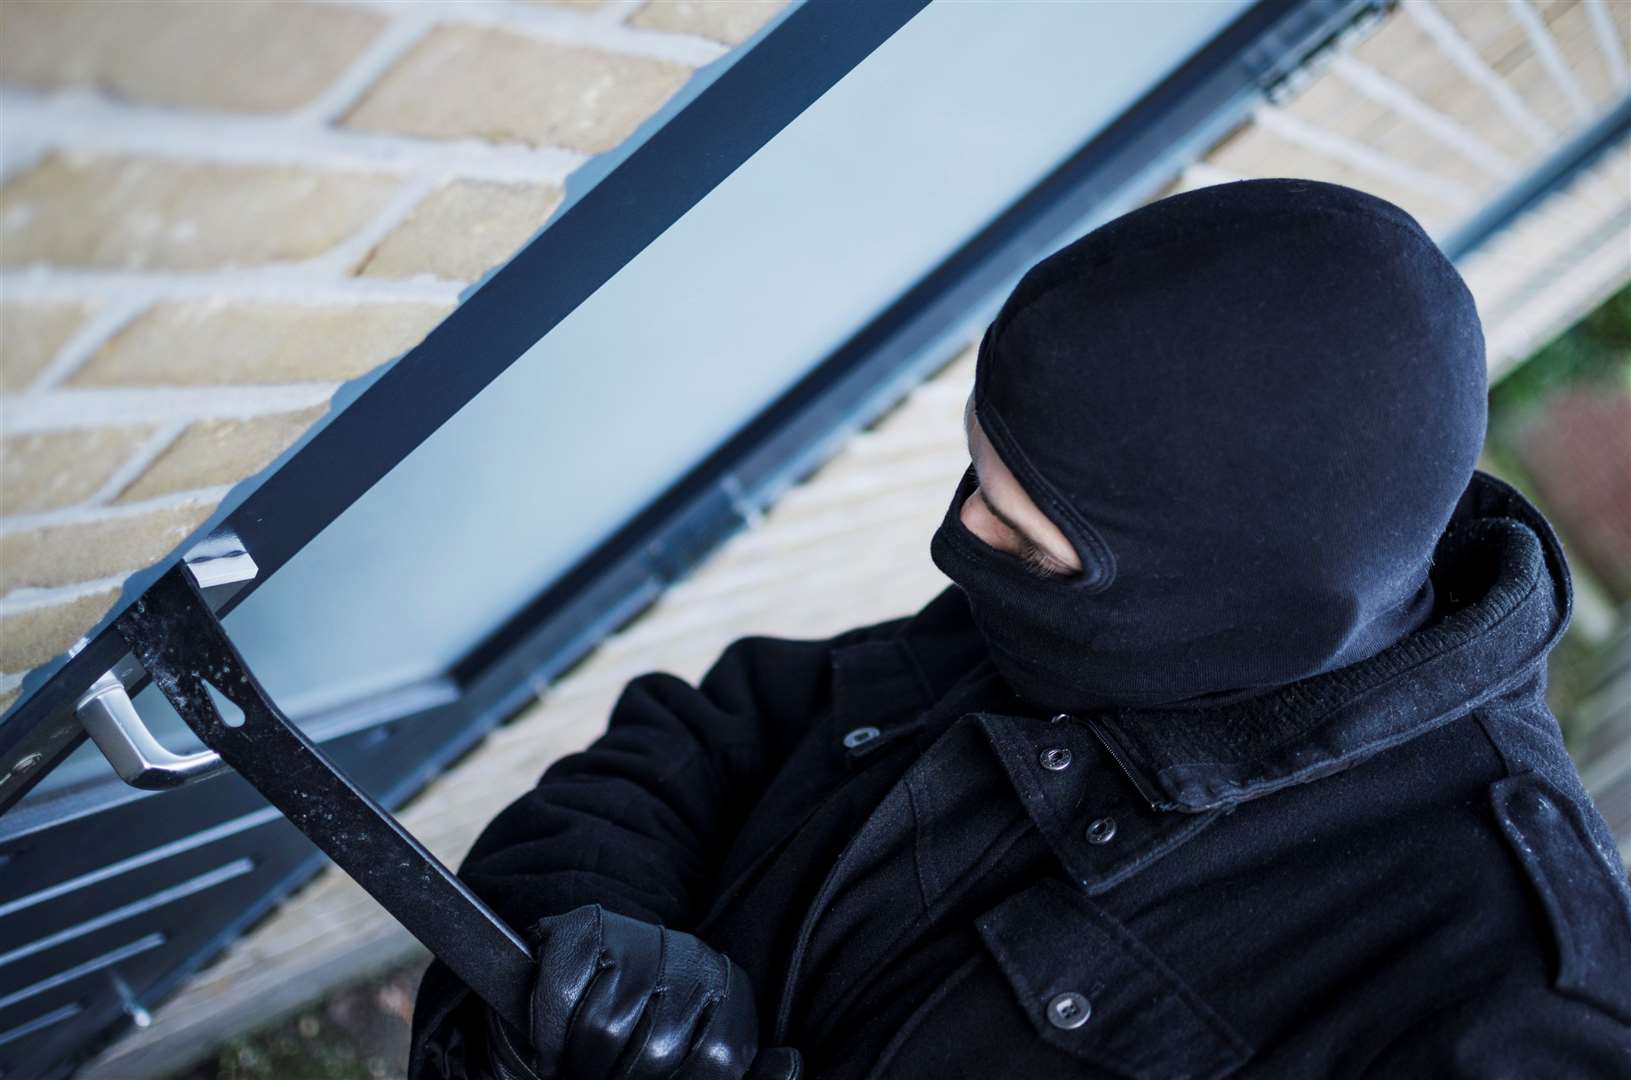 Jami Slingsby, 44, of no fixed address, is accused of five burglaries carried out in Petham and the surrounding villages near Canterbury. Picture: iStock